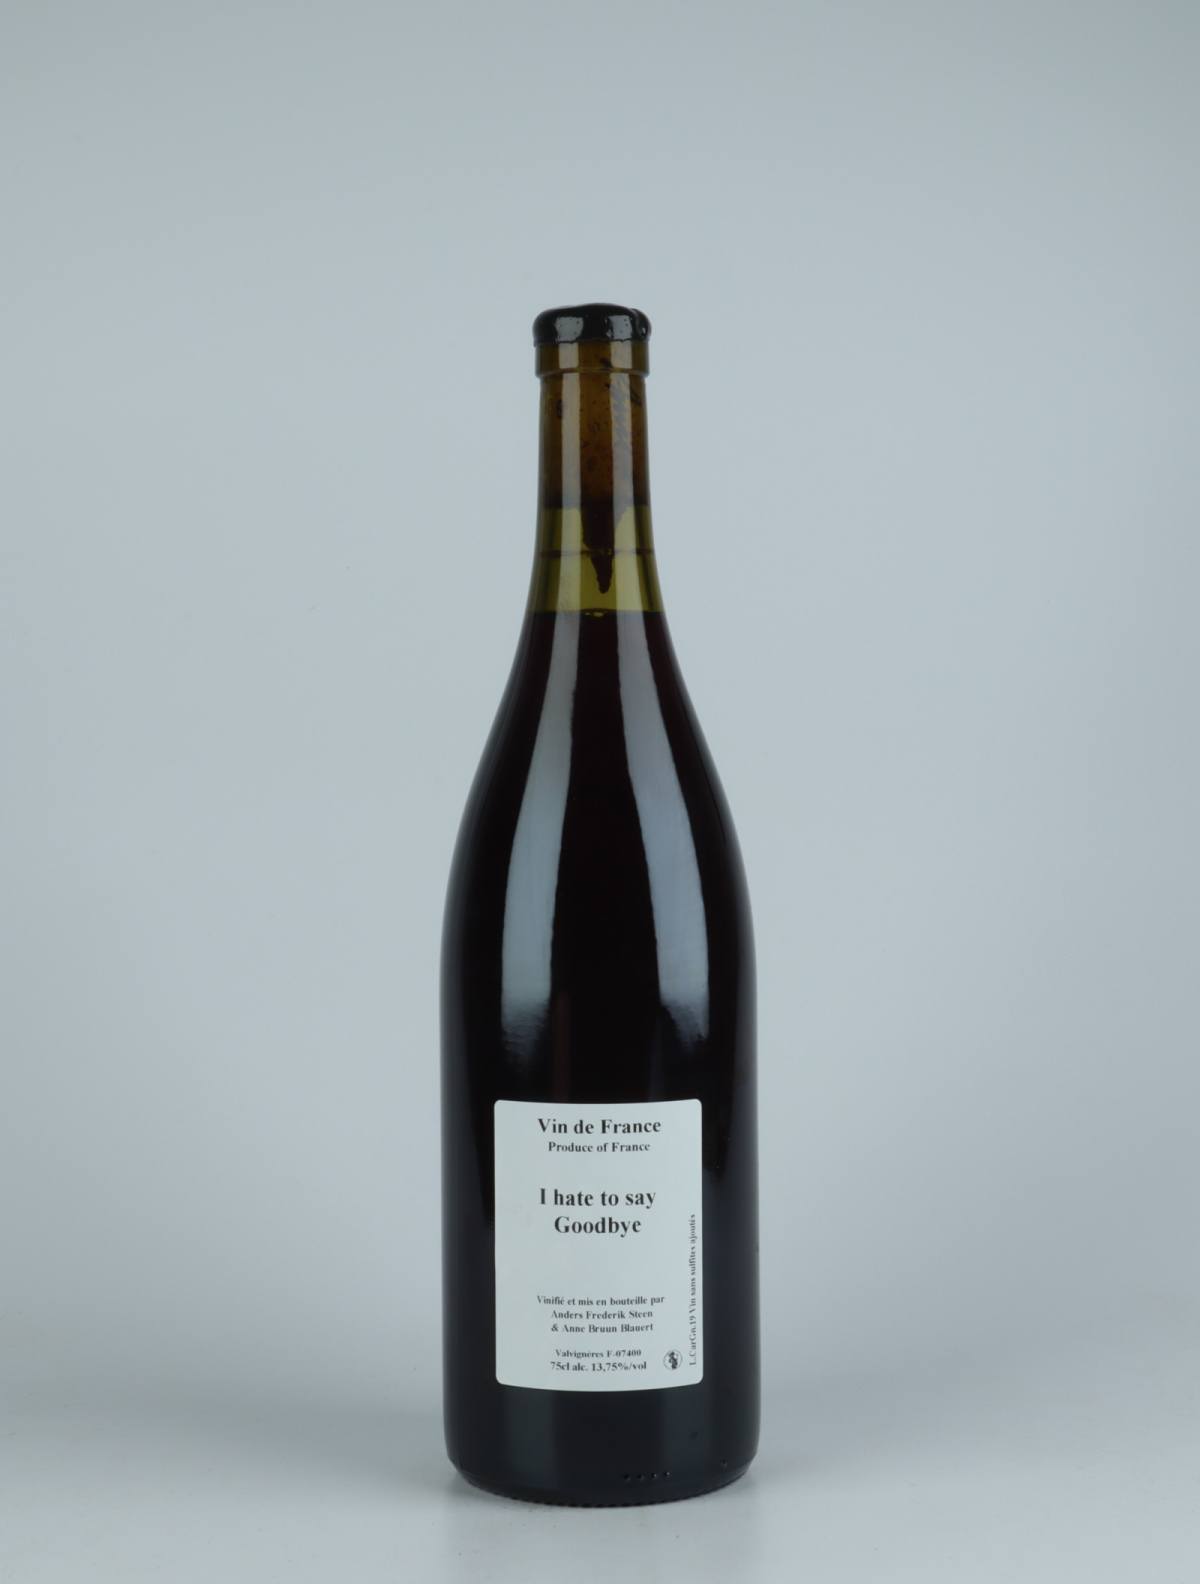 A bottle 2019 I hate to say Goodbye Red wine from Anders Frederik Steen & Anne Bruun Blauert, Ardèche in France